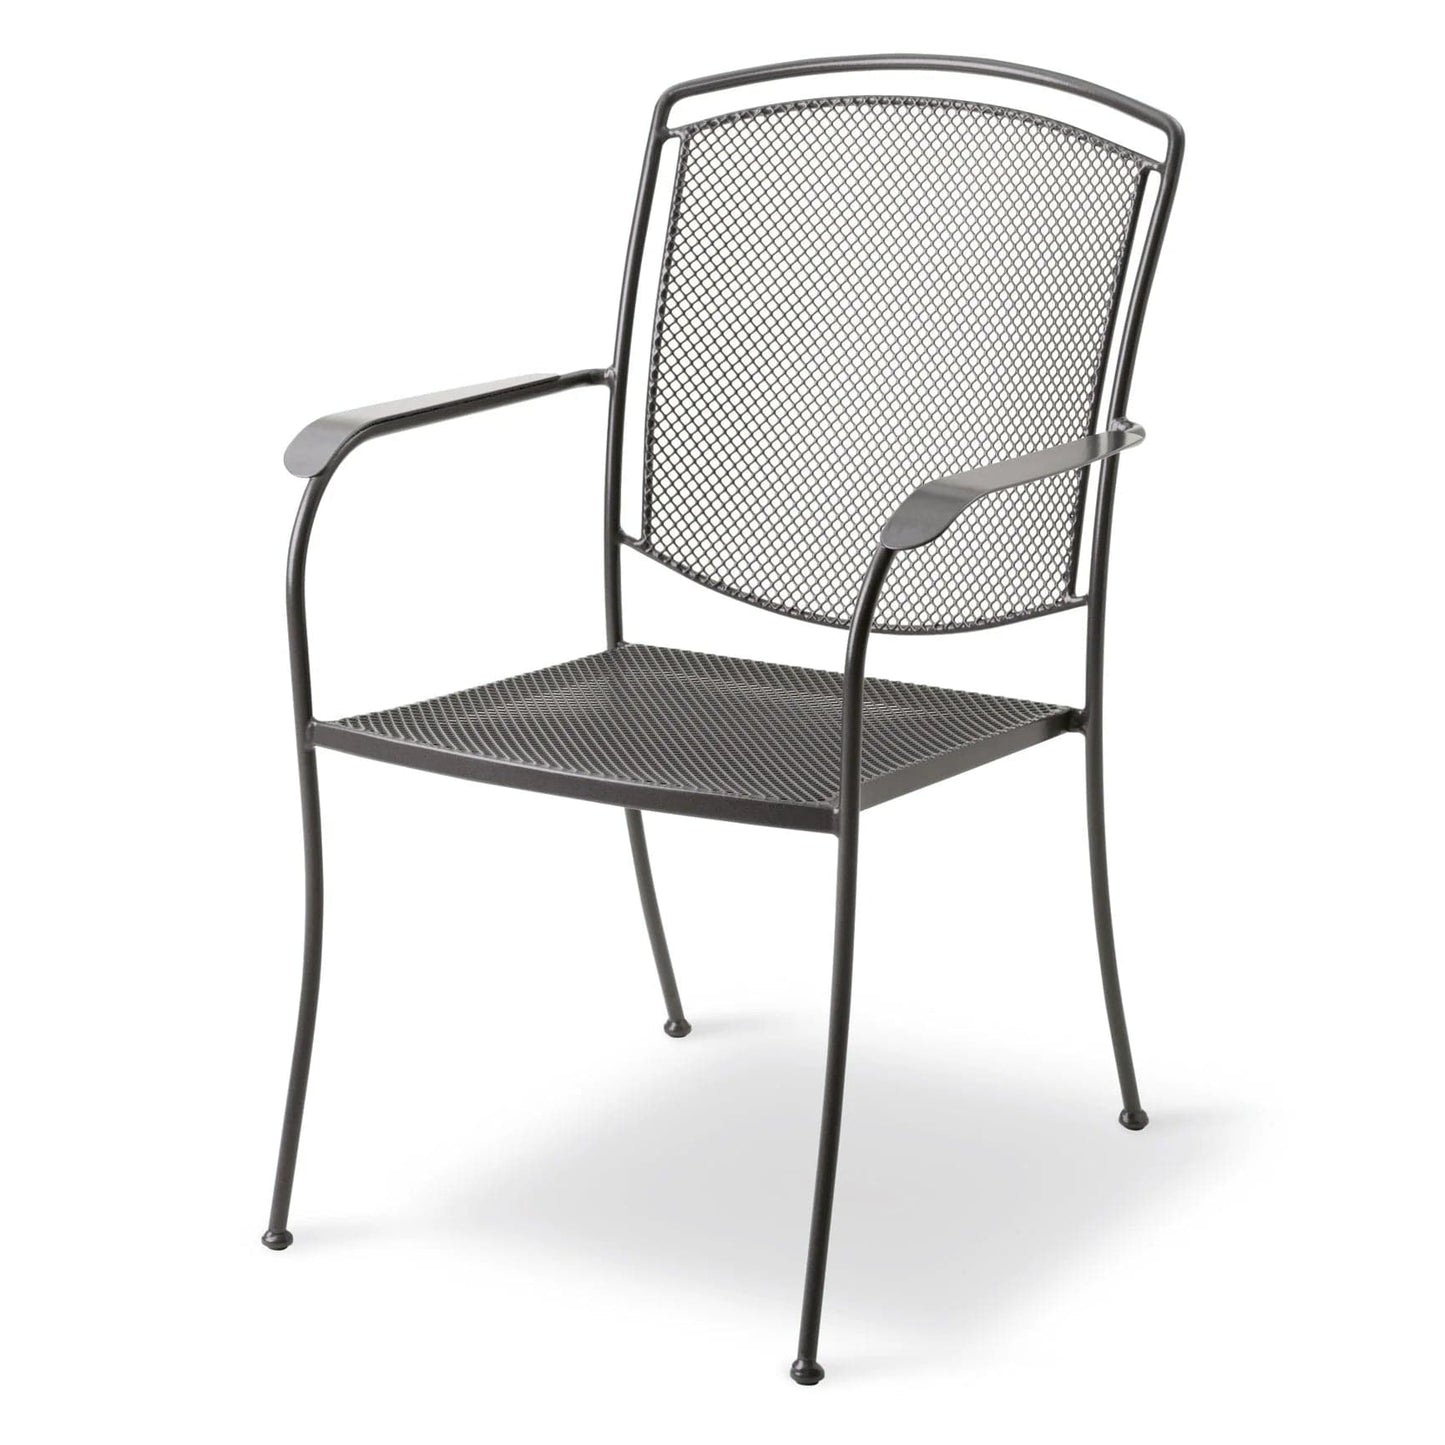 Outdoor wrought iron stackable chair